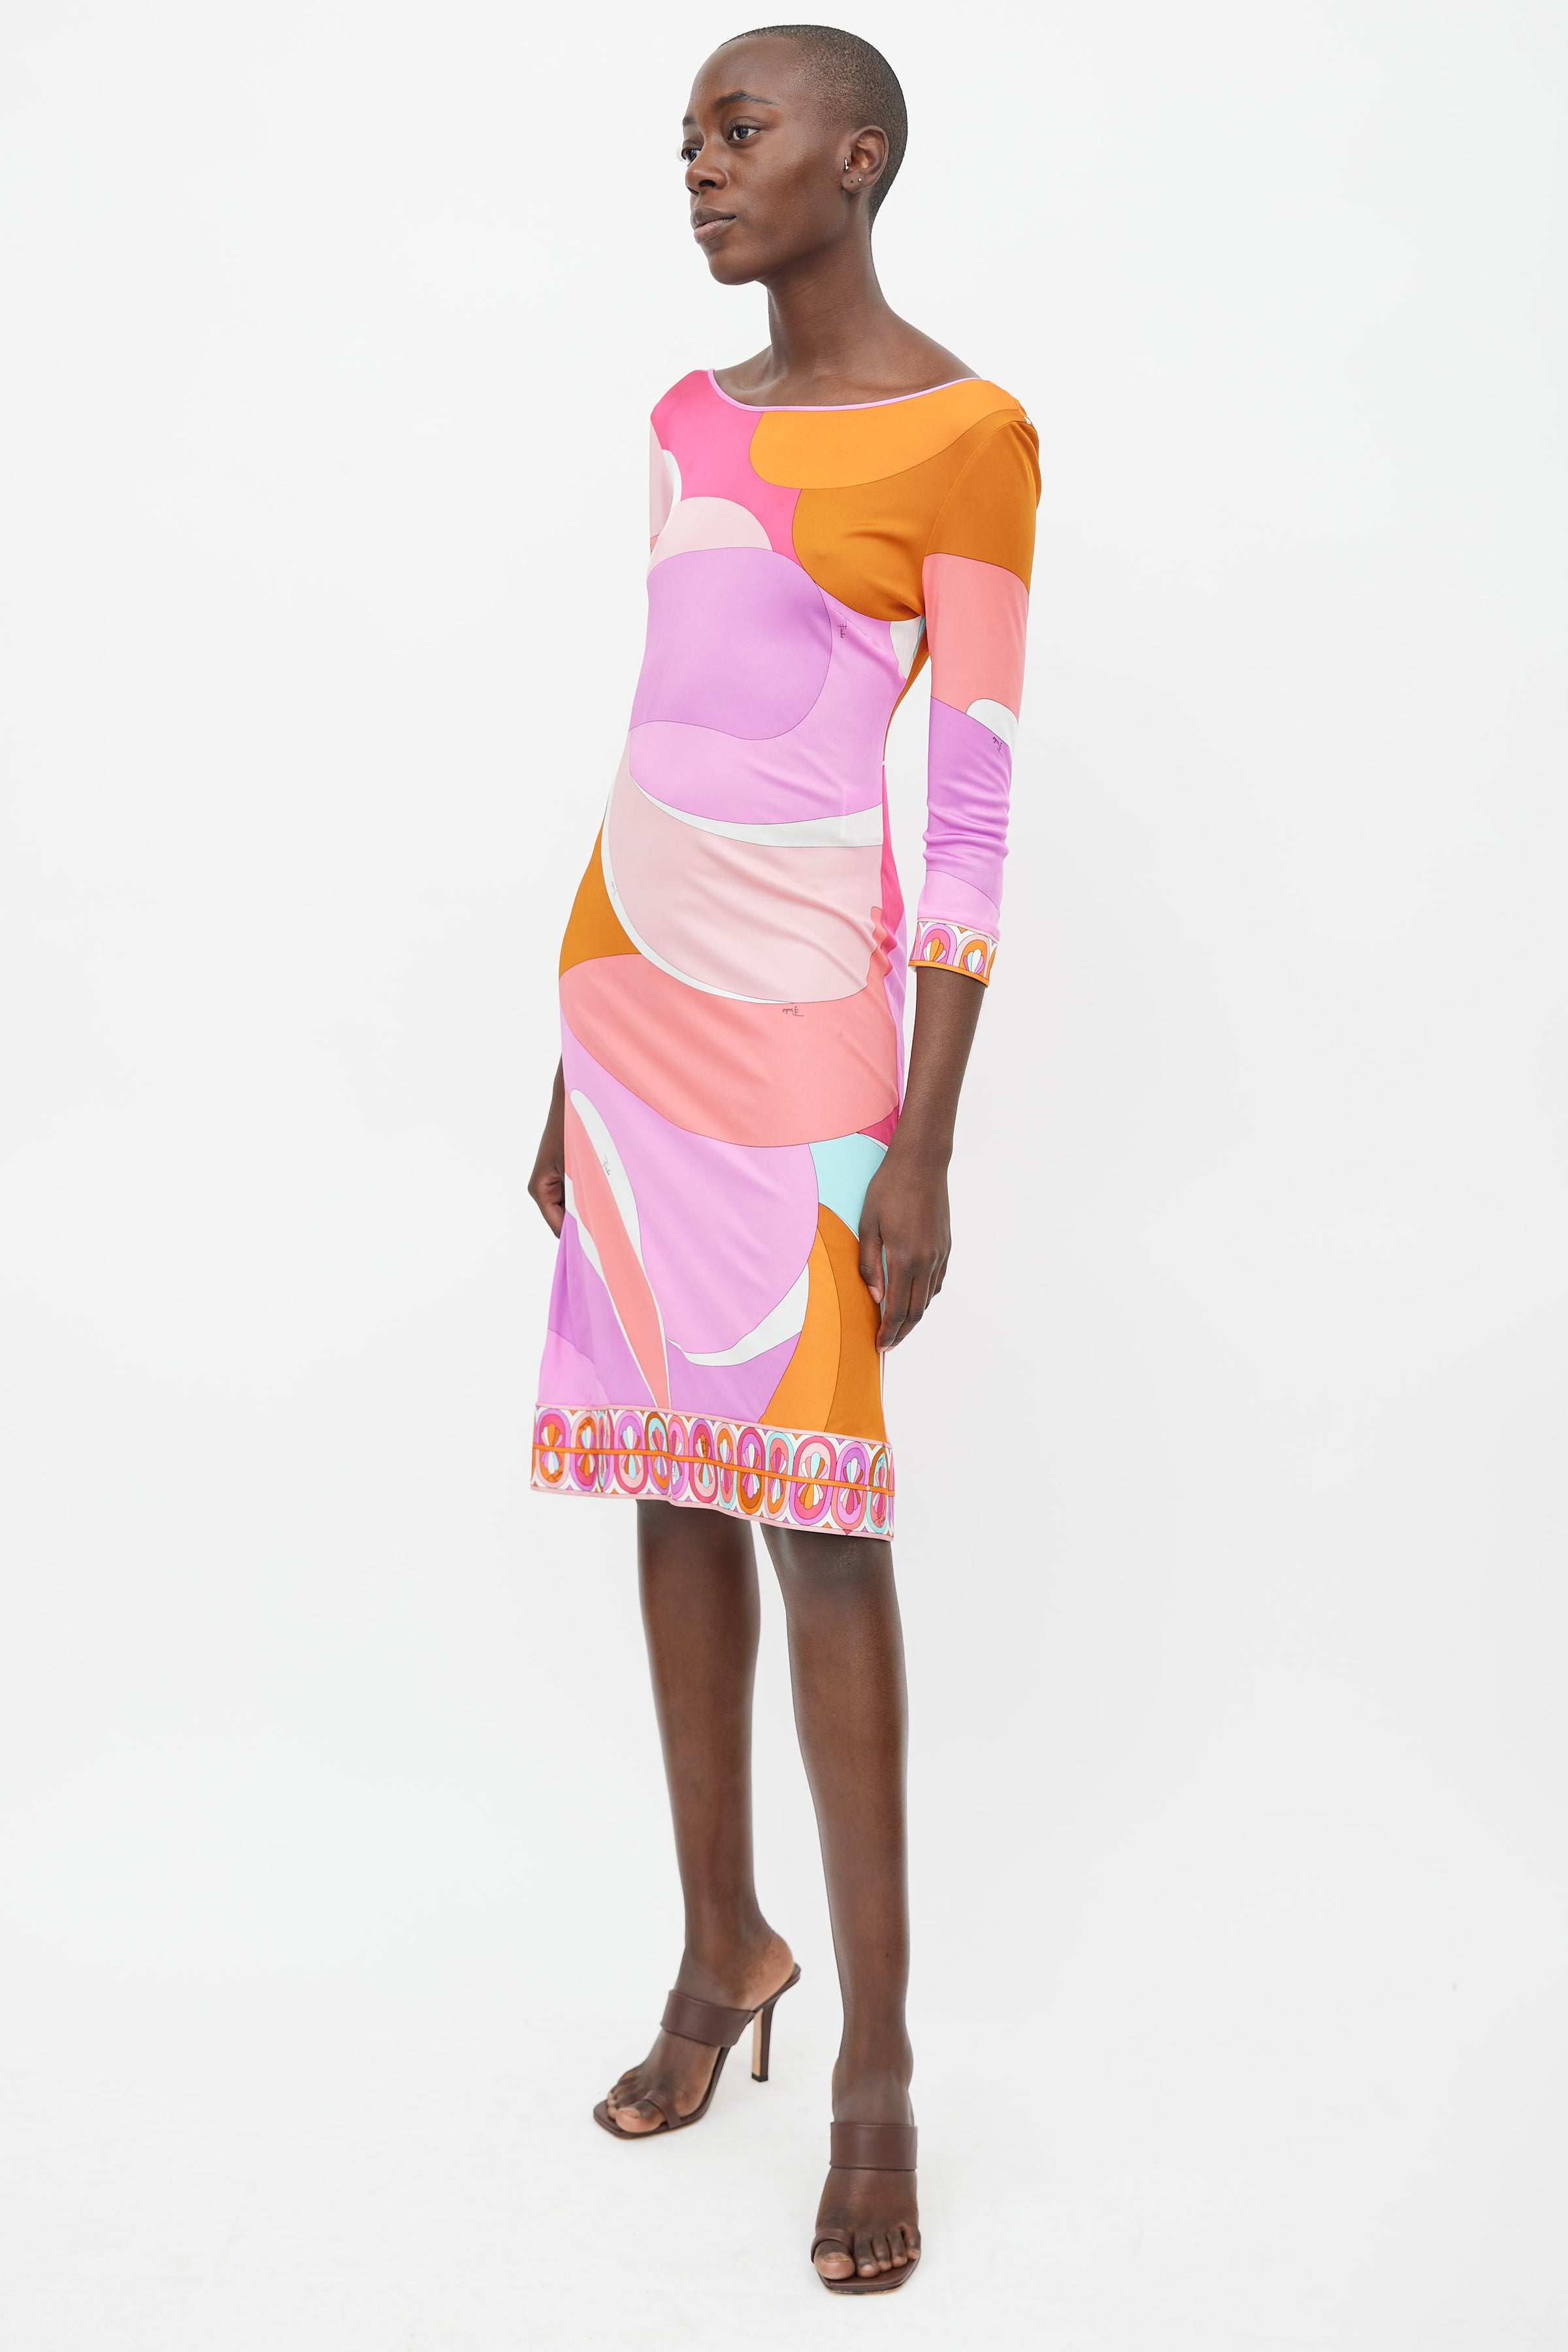 Emilio Pucci Cotton Scarf Abstract Print in Pink and Orange